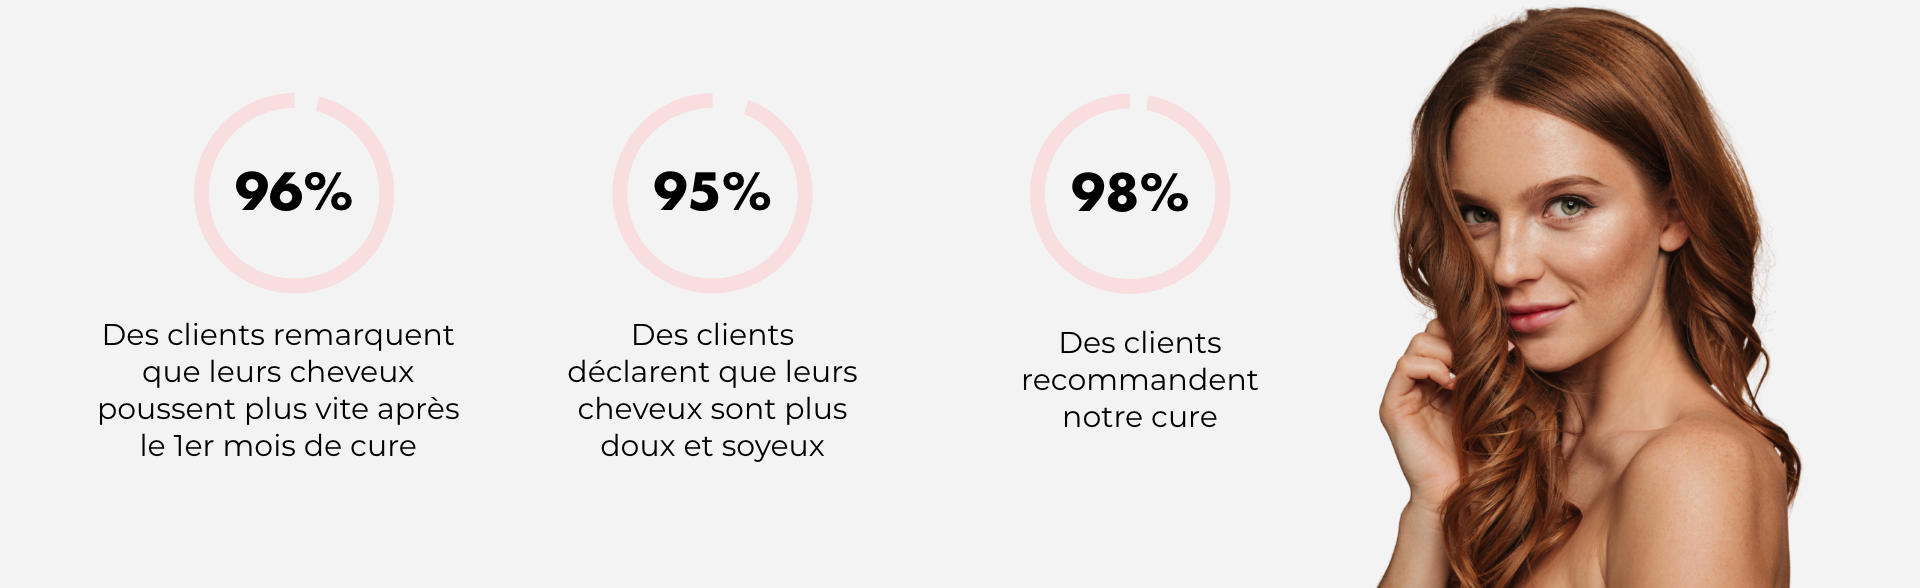 Clients recommandent miracle bio